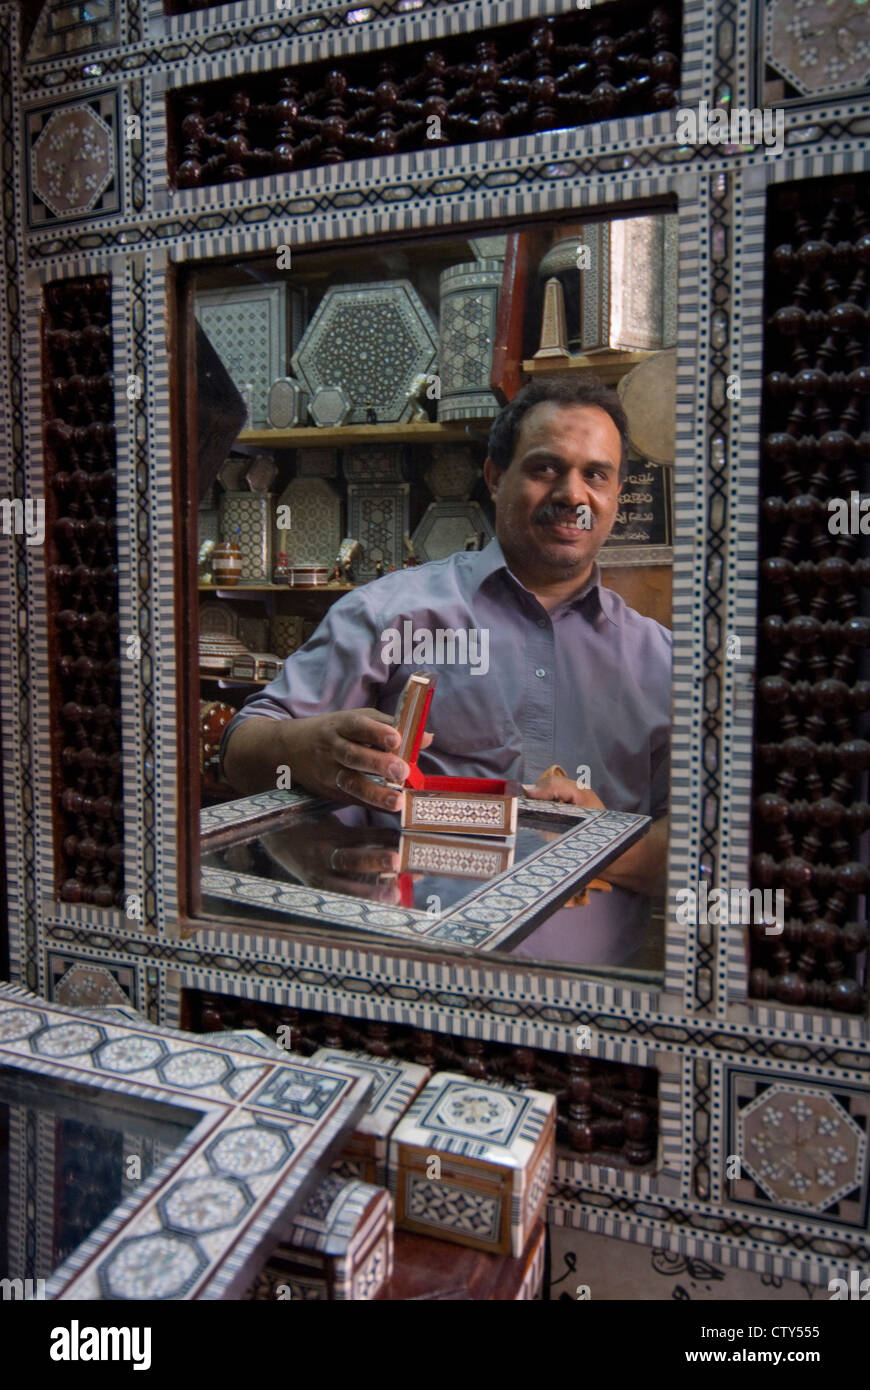 Artisan Nabil El Tablawy with his products in mother of pearl, Khan Al Khalili Bazaar, , Cairo, Egypt, North Africa, Africa Stock Photo